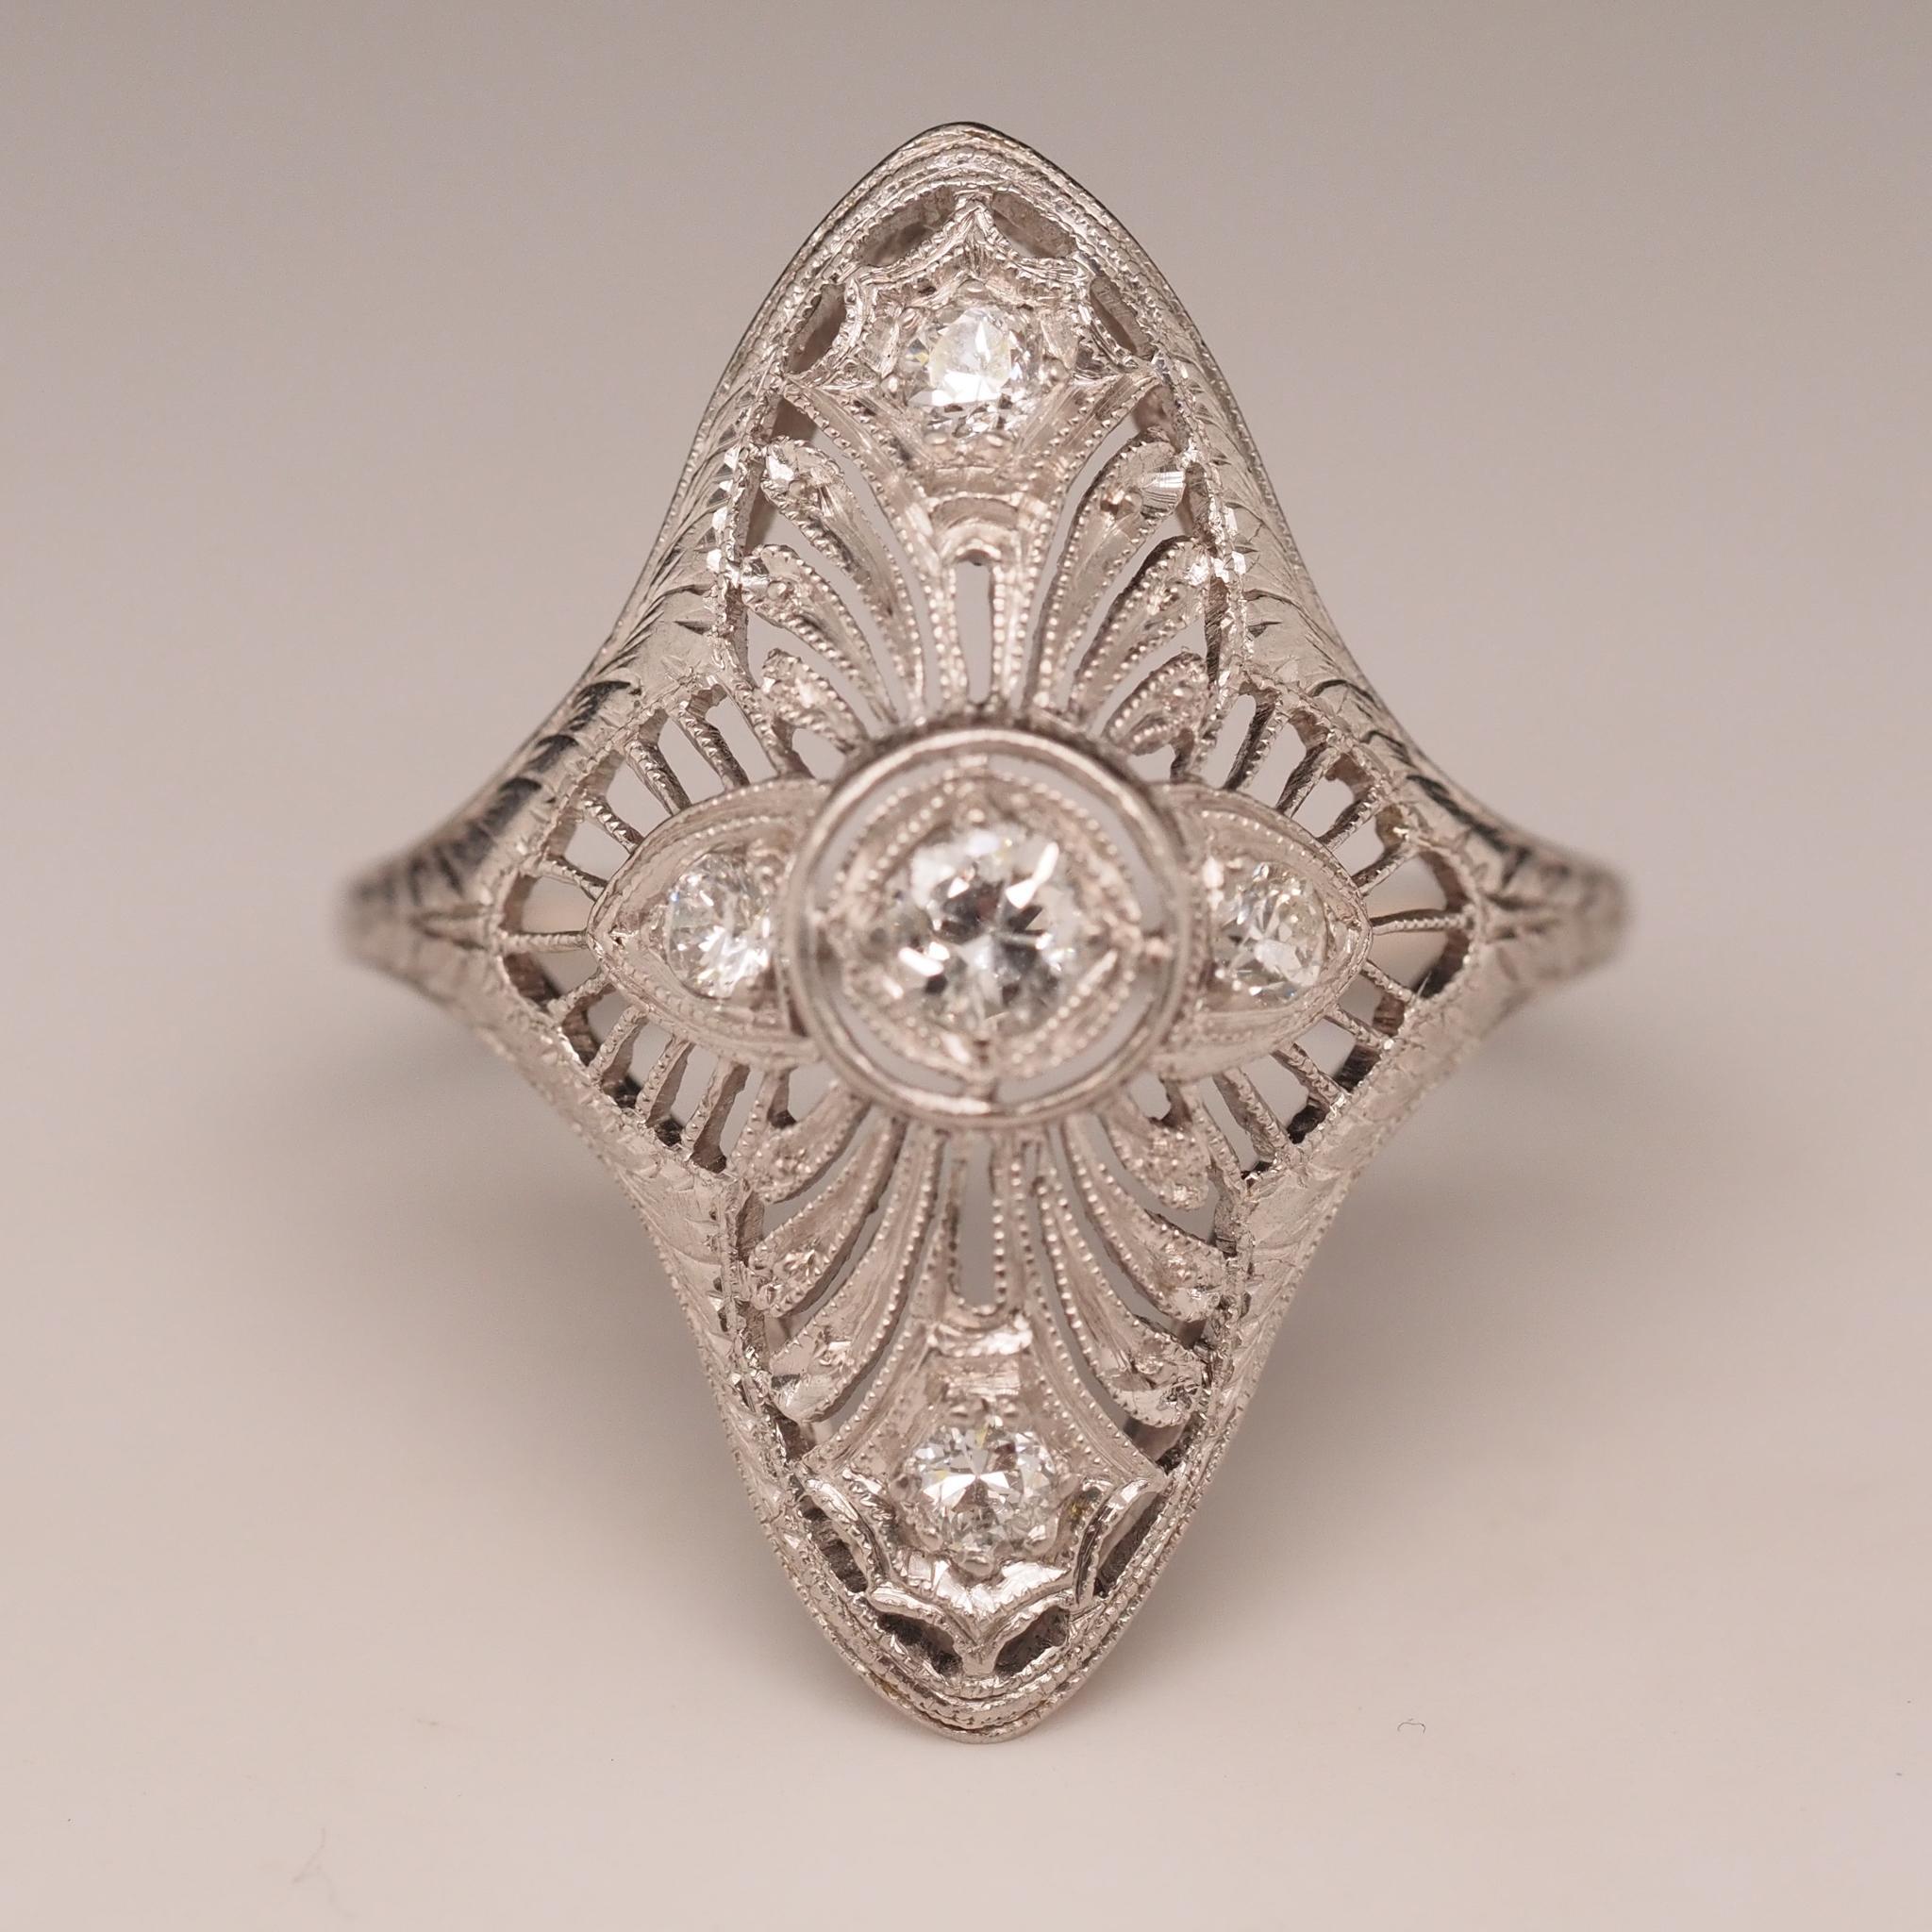 Year: 1920s
Item Details:
Ring Size: 9.5 (Sizable)
Metal Type: Platinum [Hallmarked, and Tested]
Weight: 5.5 grams
Diamond Details: .25ct total weight, old European brilliant, F color, VS Clarity
Band Width: 1.5mm
Condition: Excellent